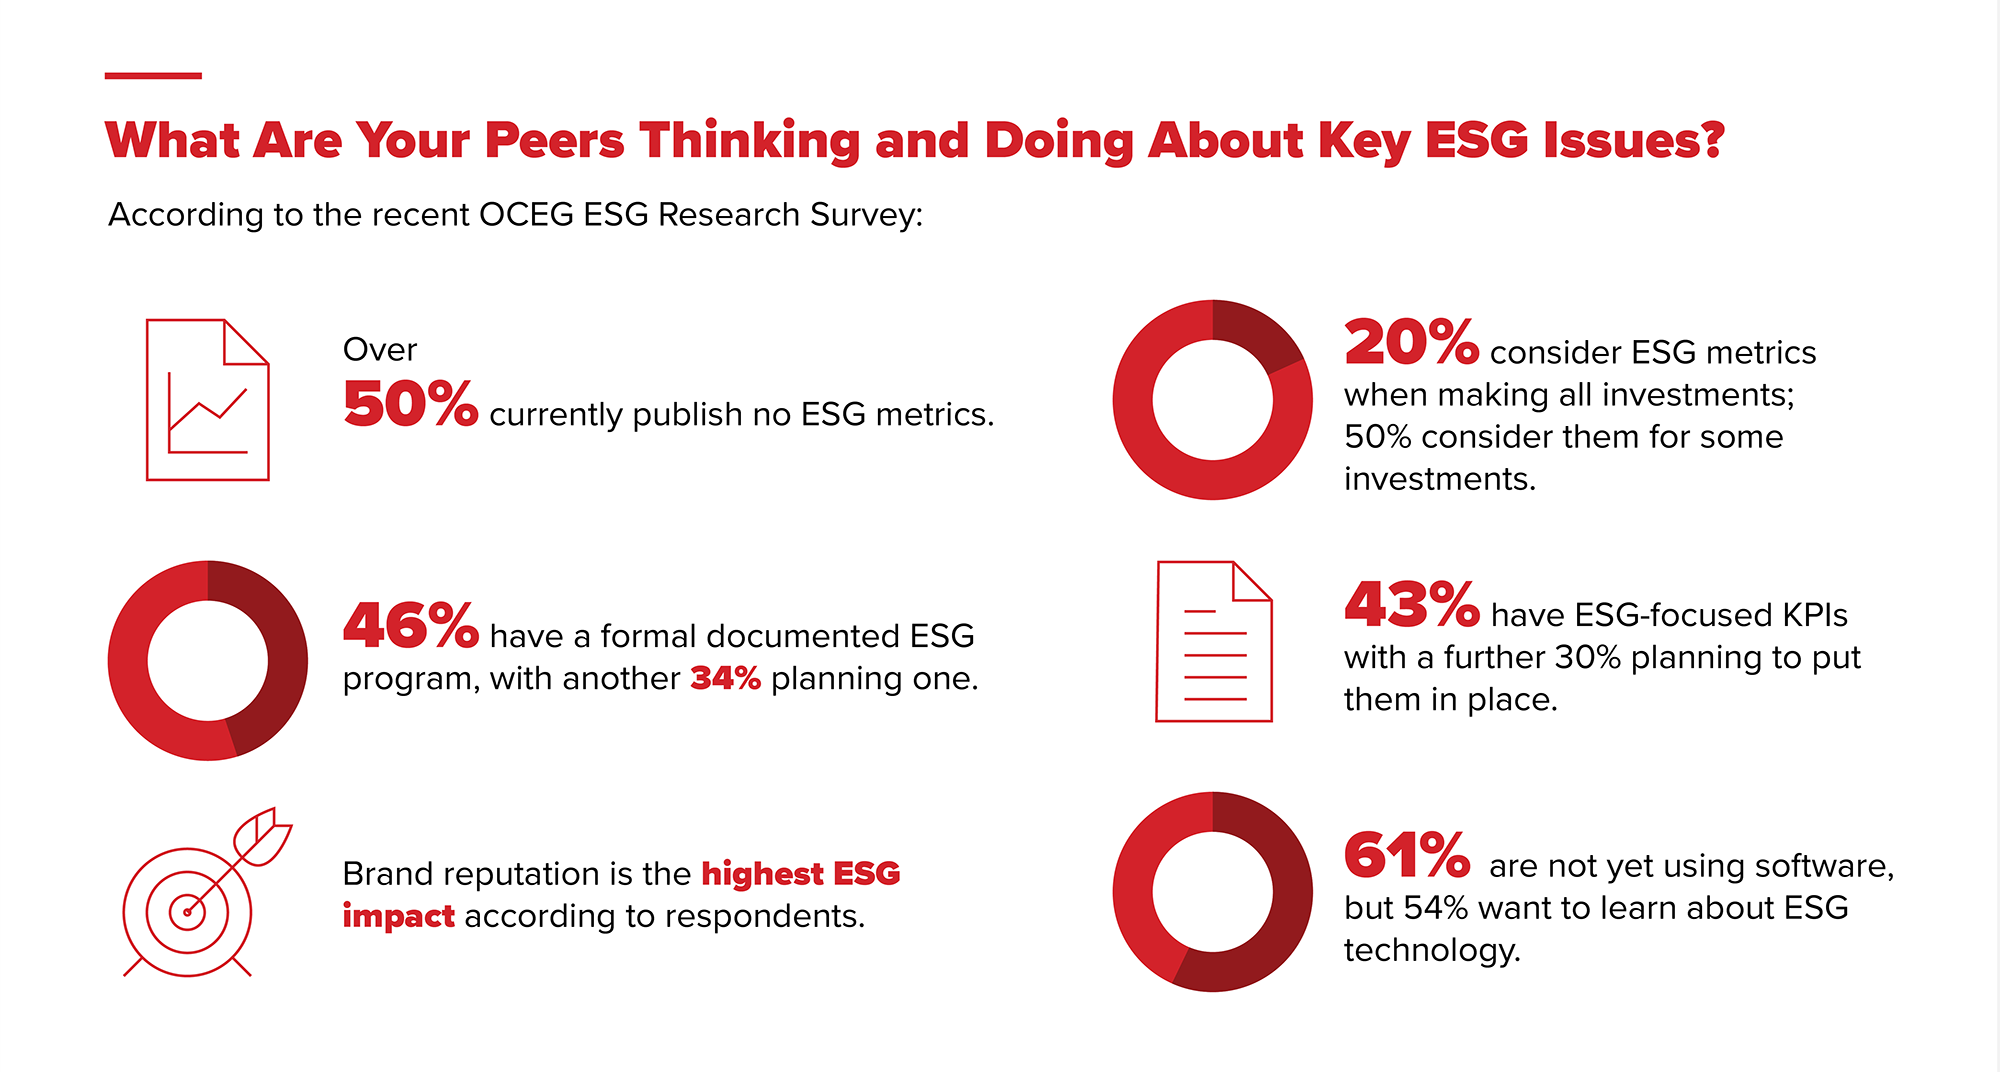 What Are Your Peers Thinking About Key ESG Issues?